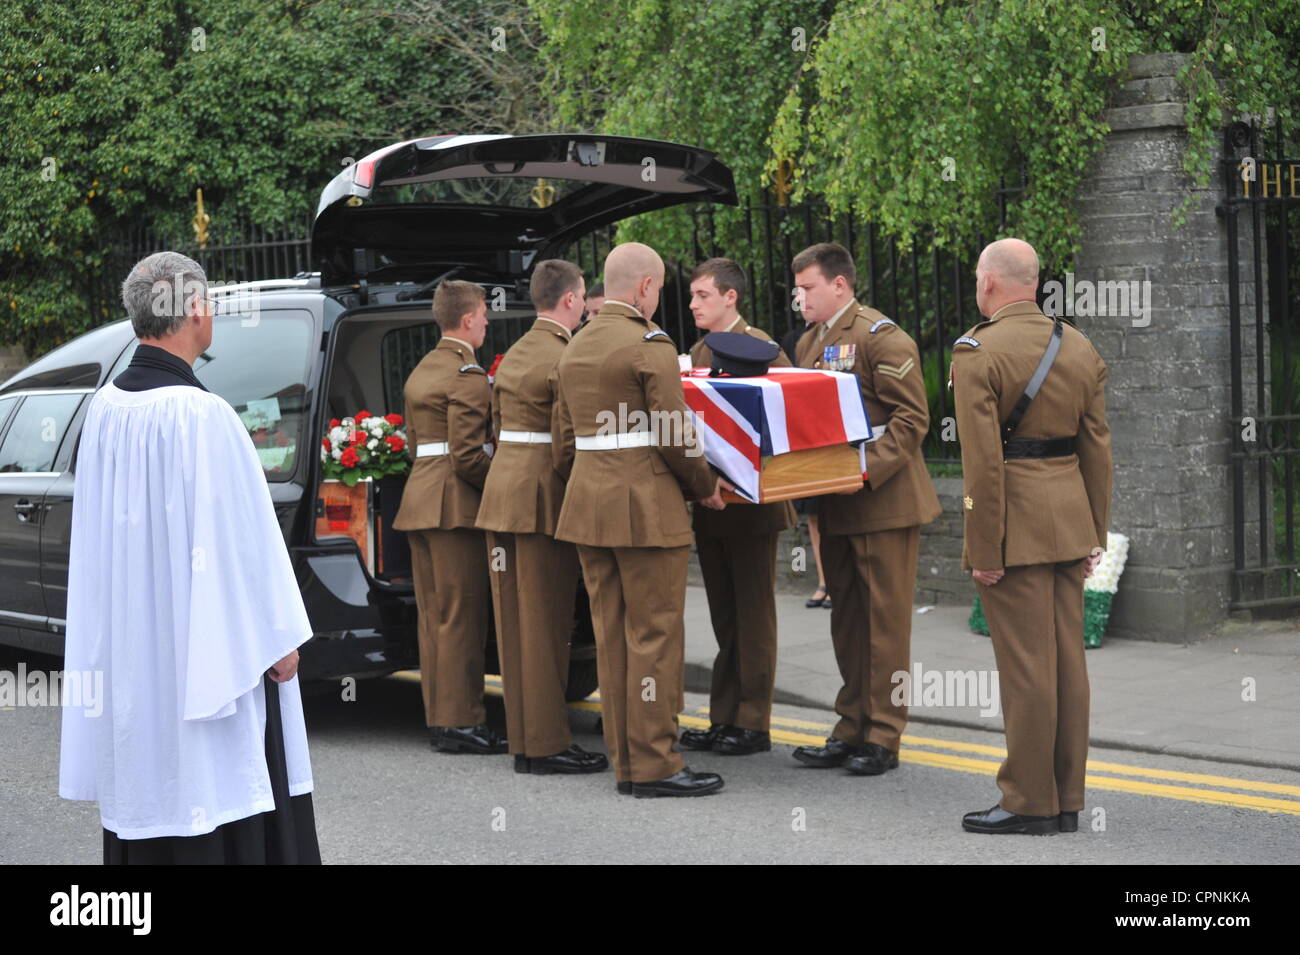 The funeral service for L/Cpl Lee Davies from 1st Battalion Welsh Guards was held at 11:30am on Tuesday 29th May 2012 at St. Mary's Church, Church Street, Cardigan, UK followed by cremation at Parc Gwyn Crematorium, Narberth, Pembrokeshire, UK. L/Cpl Davies was shot dead in Afghanistan on 12/05/2012 Stock Photo